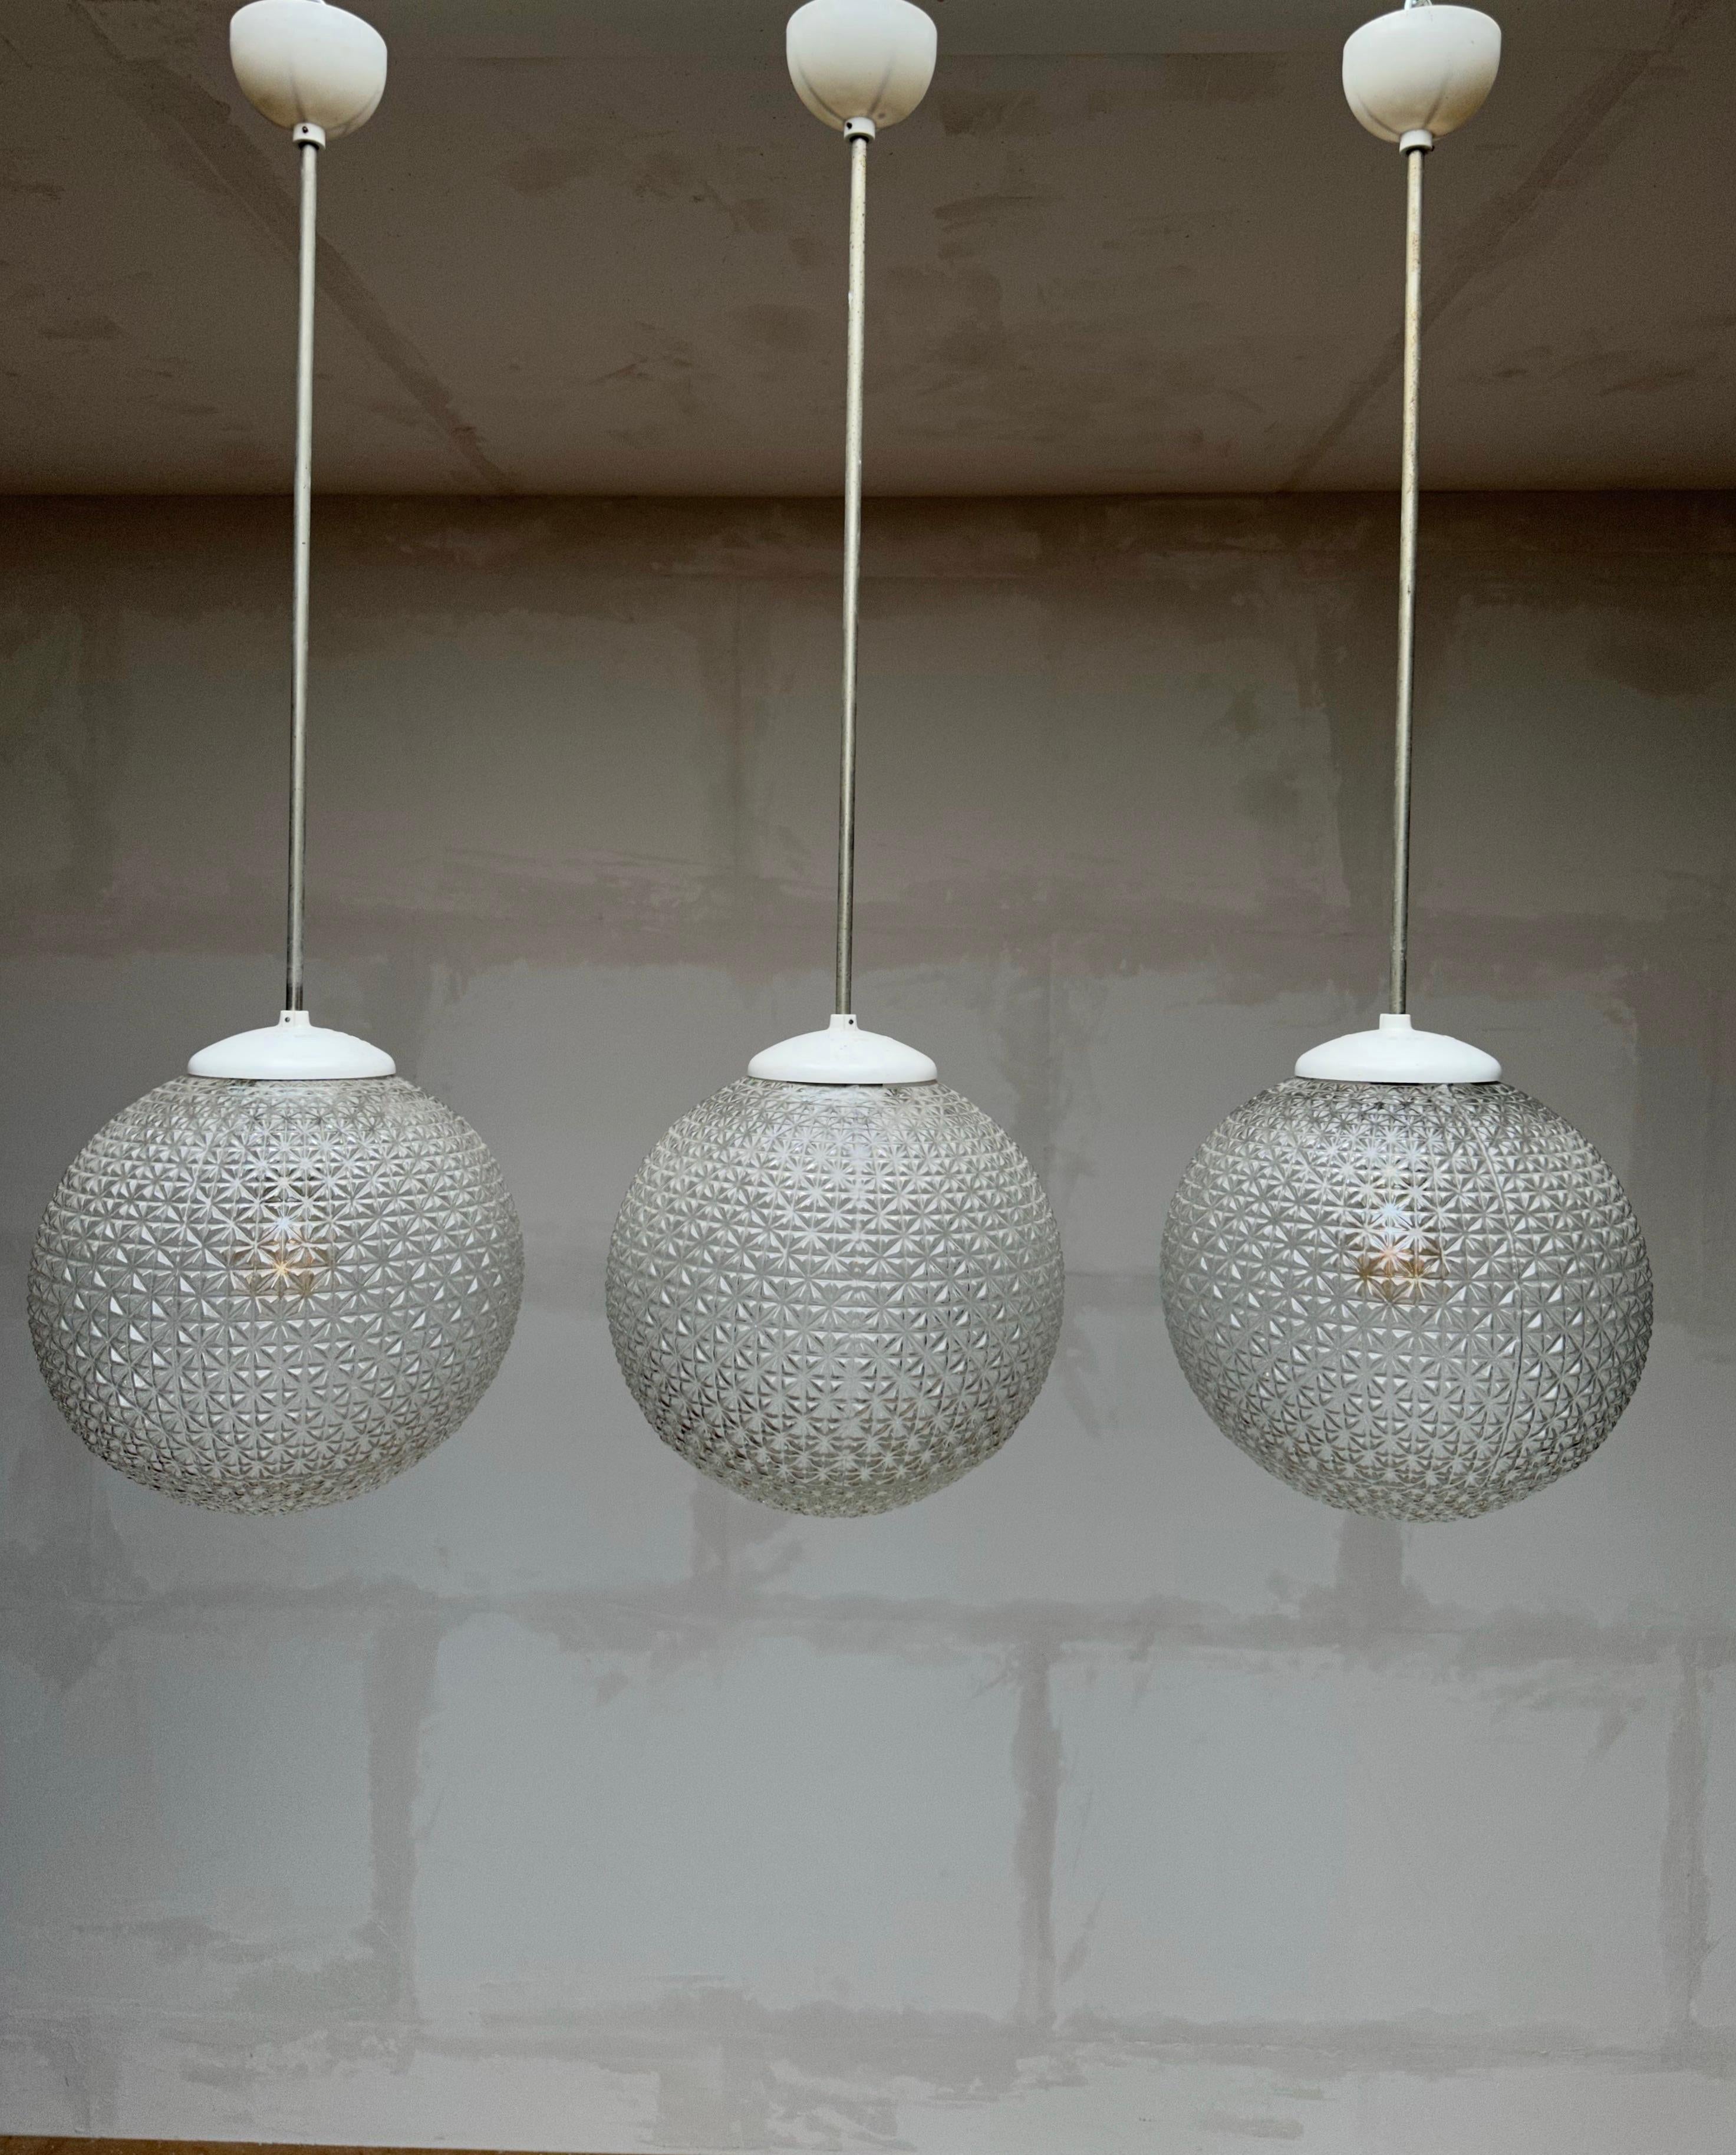 Group of three identical and good size, globe design pendant lights.

If you are looking for a group of beautiful and truly timeless pendants for a hallway, a large table or otherwise then this set of three could be your perfect lighting solution.